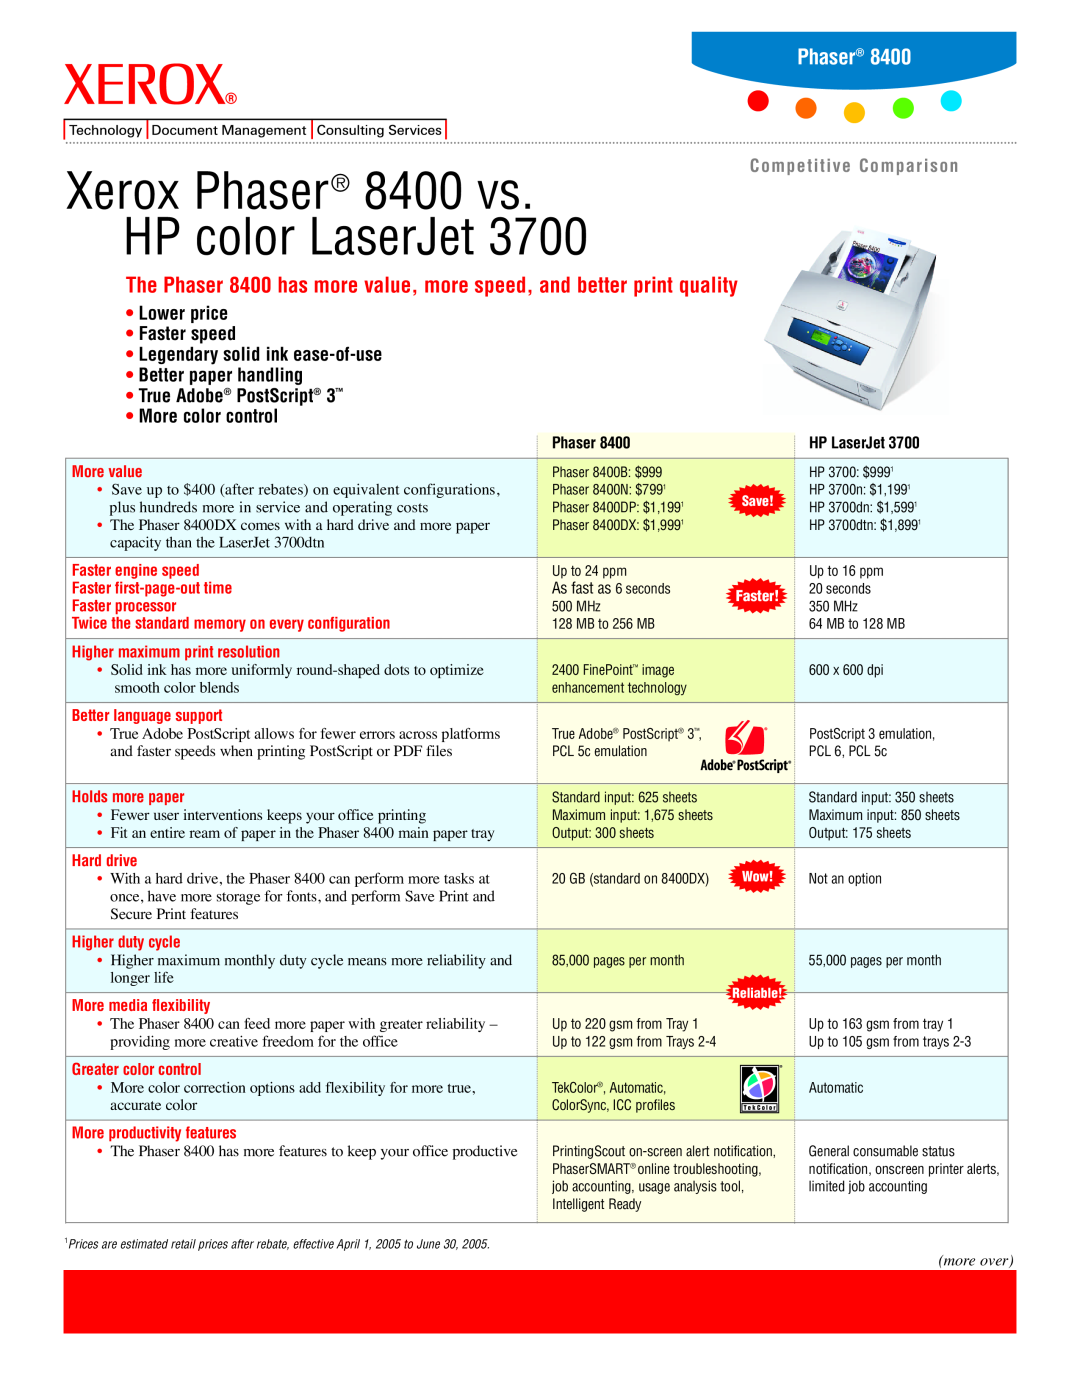 Xerox 8400B, 8400N manual Competitive Comparison, Xerox Phaser 8400 vs. HP color LaserJet, Lower price Faster speed 